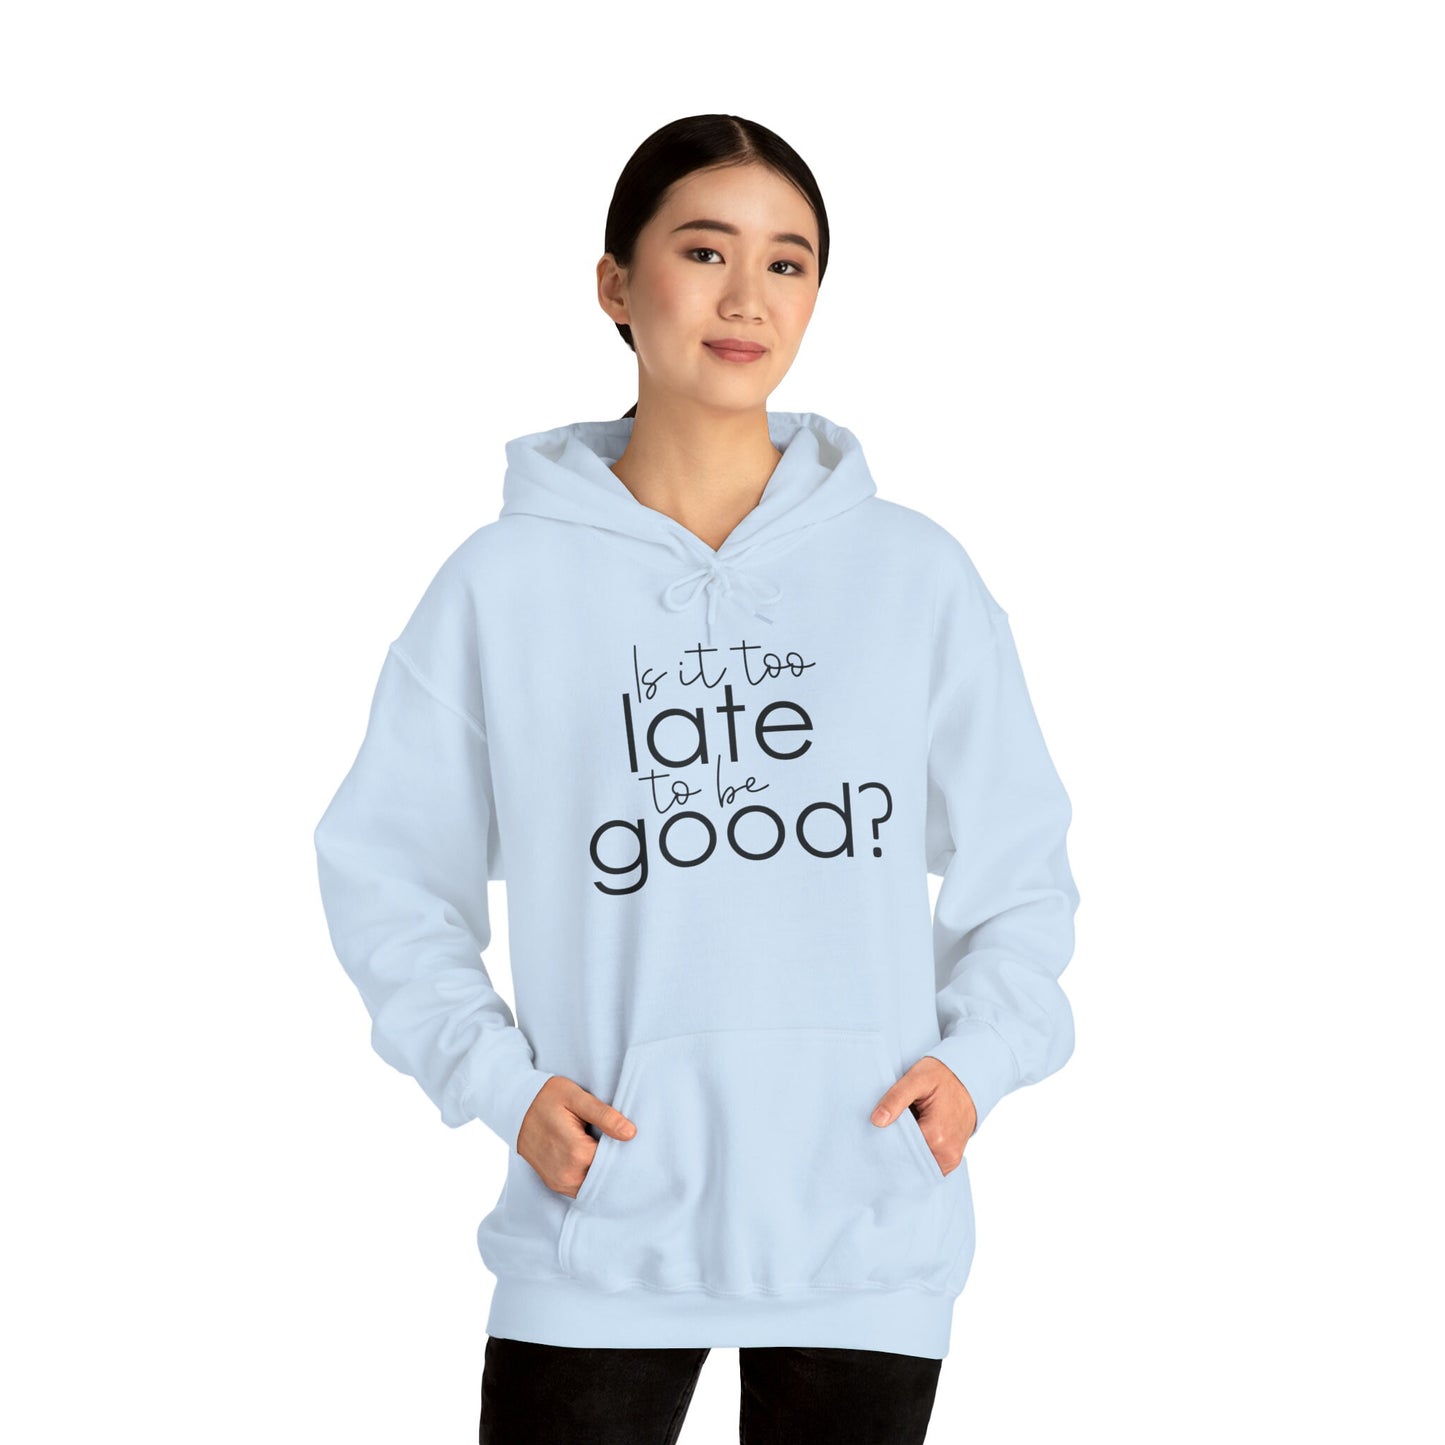 Is it too Late to be Good? - Funny Christmas - Unisex Heavy Blend™ Hooded Sweatshirt